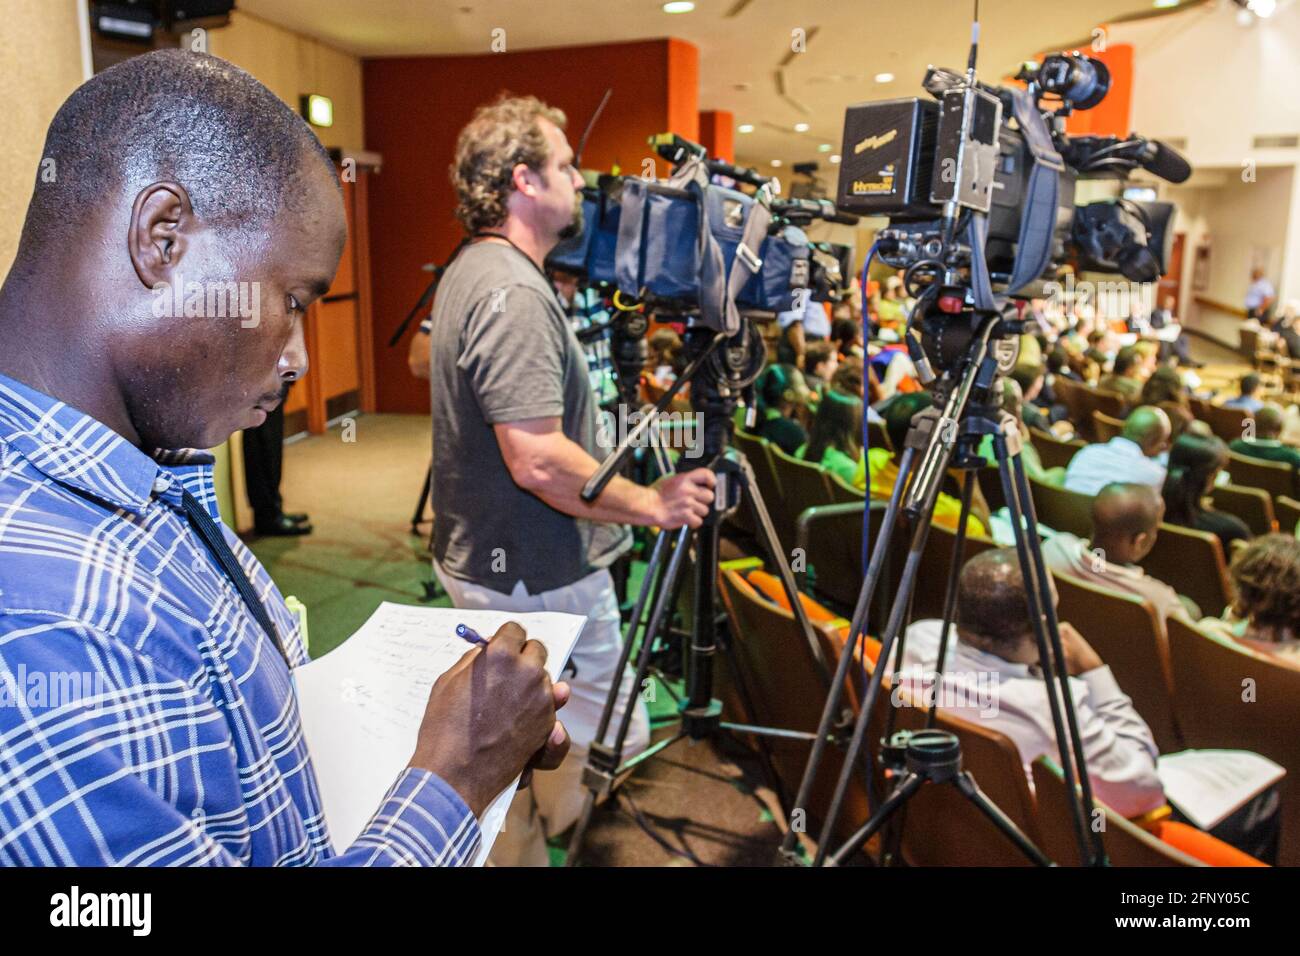 Miami Florida,Board of Education meeting,discuss discussing school closings members,Black man male journalist reporter media,television video cameras, Stock Photo